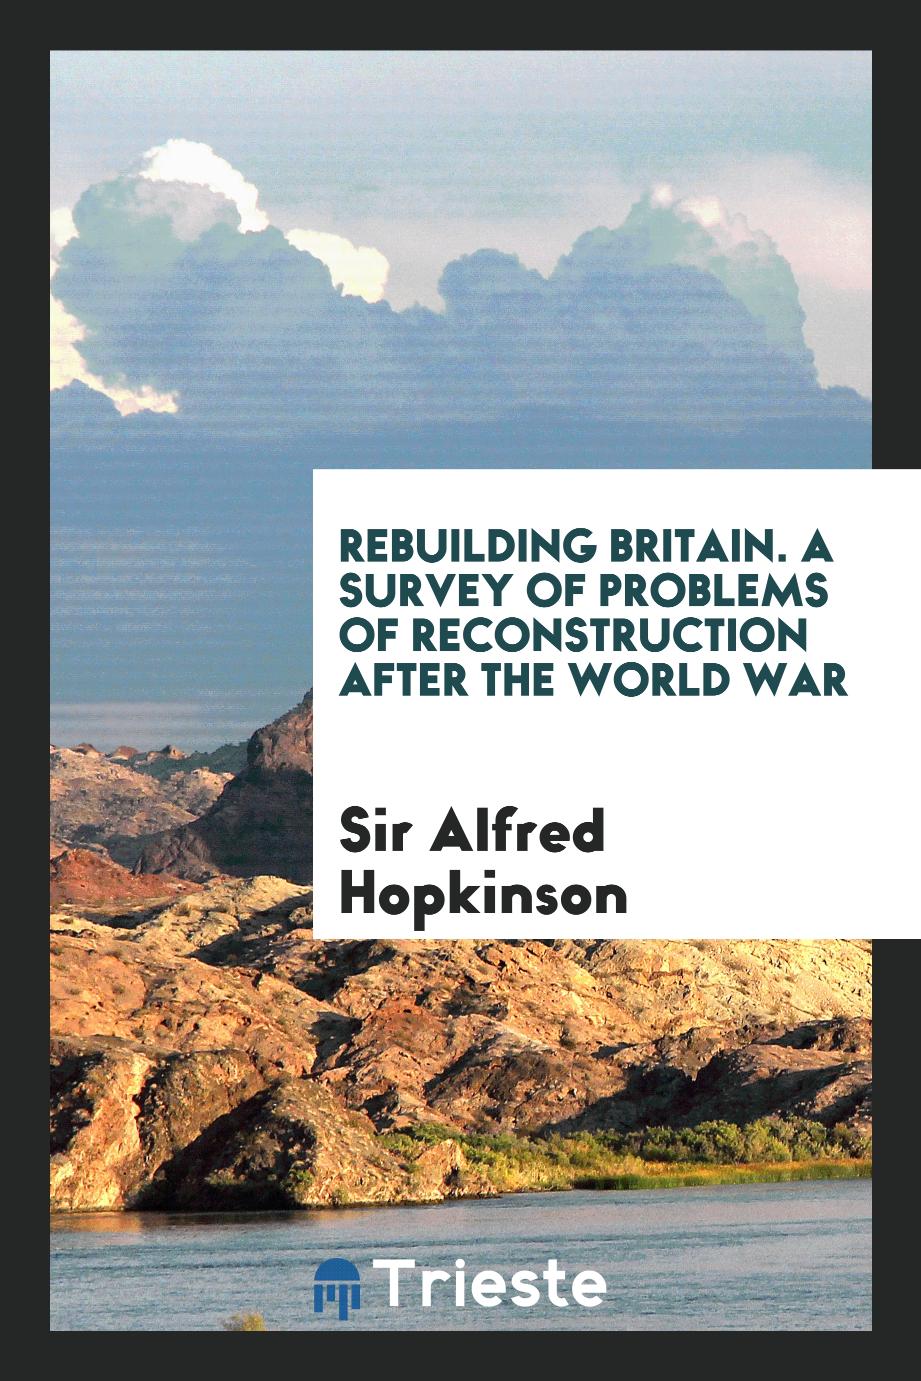 Rebuilding Britain. A Survey of Problems of Reconstruction after the World War